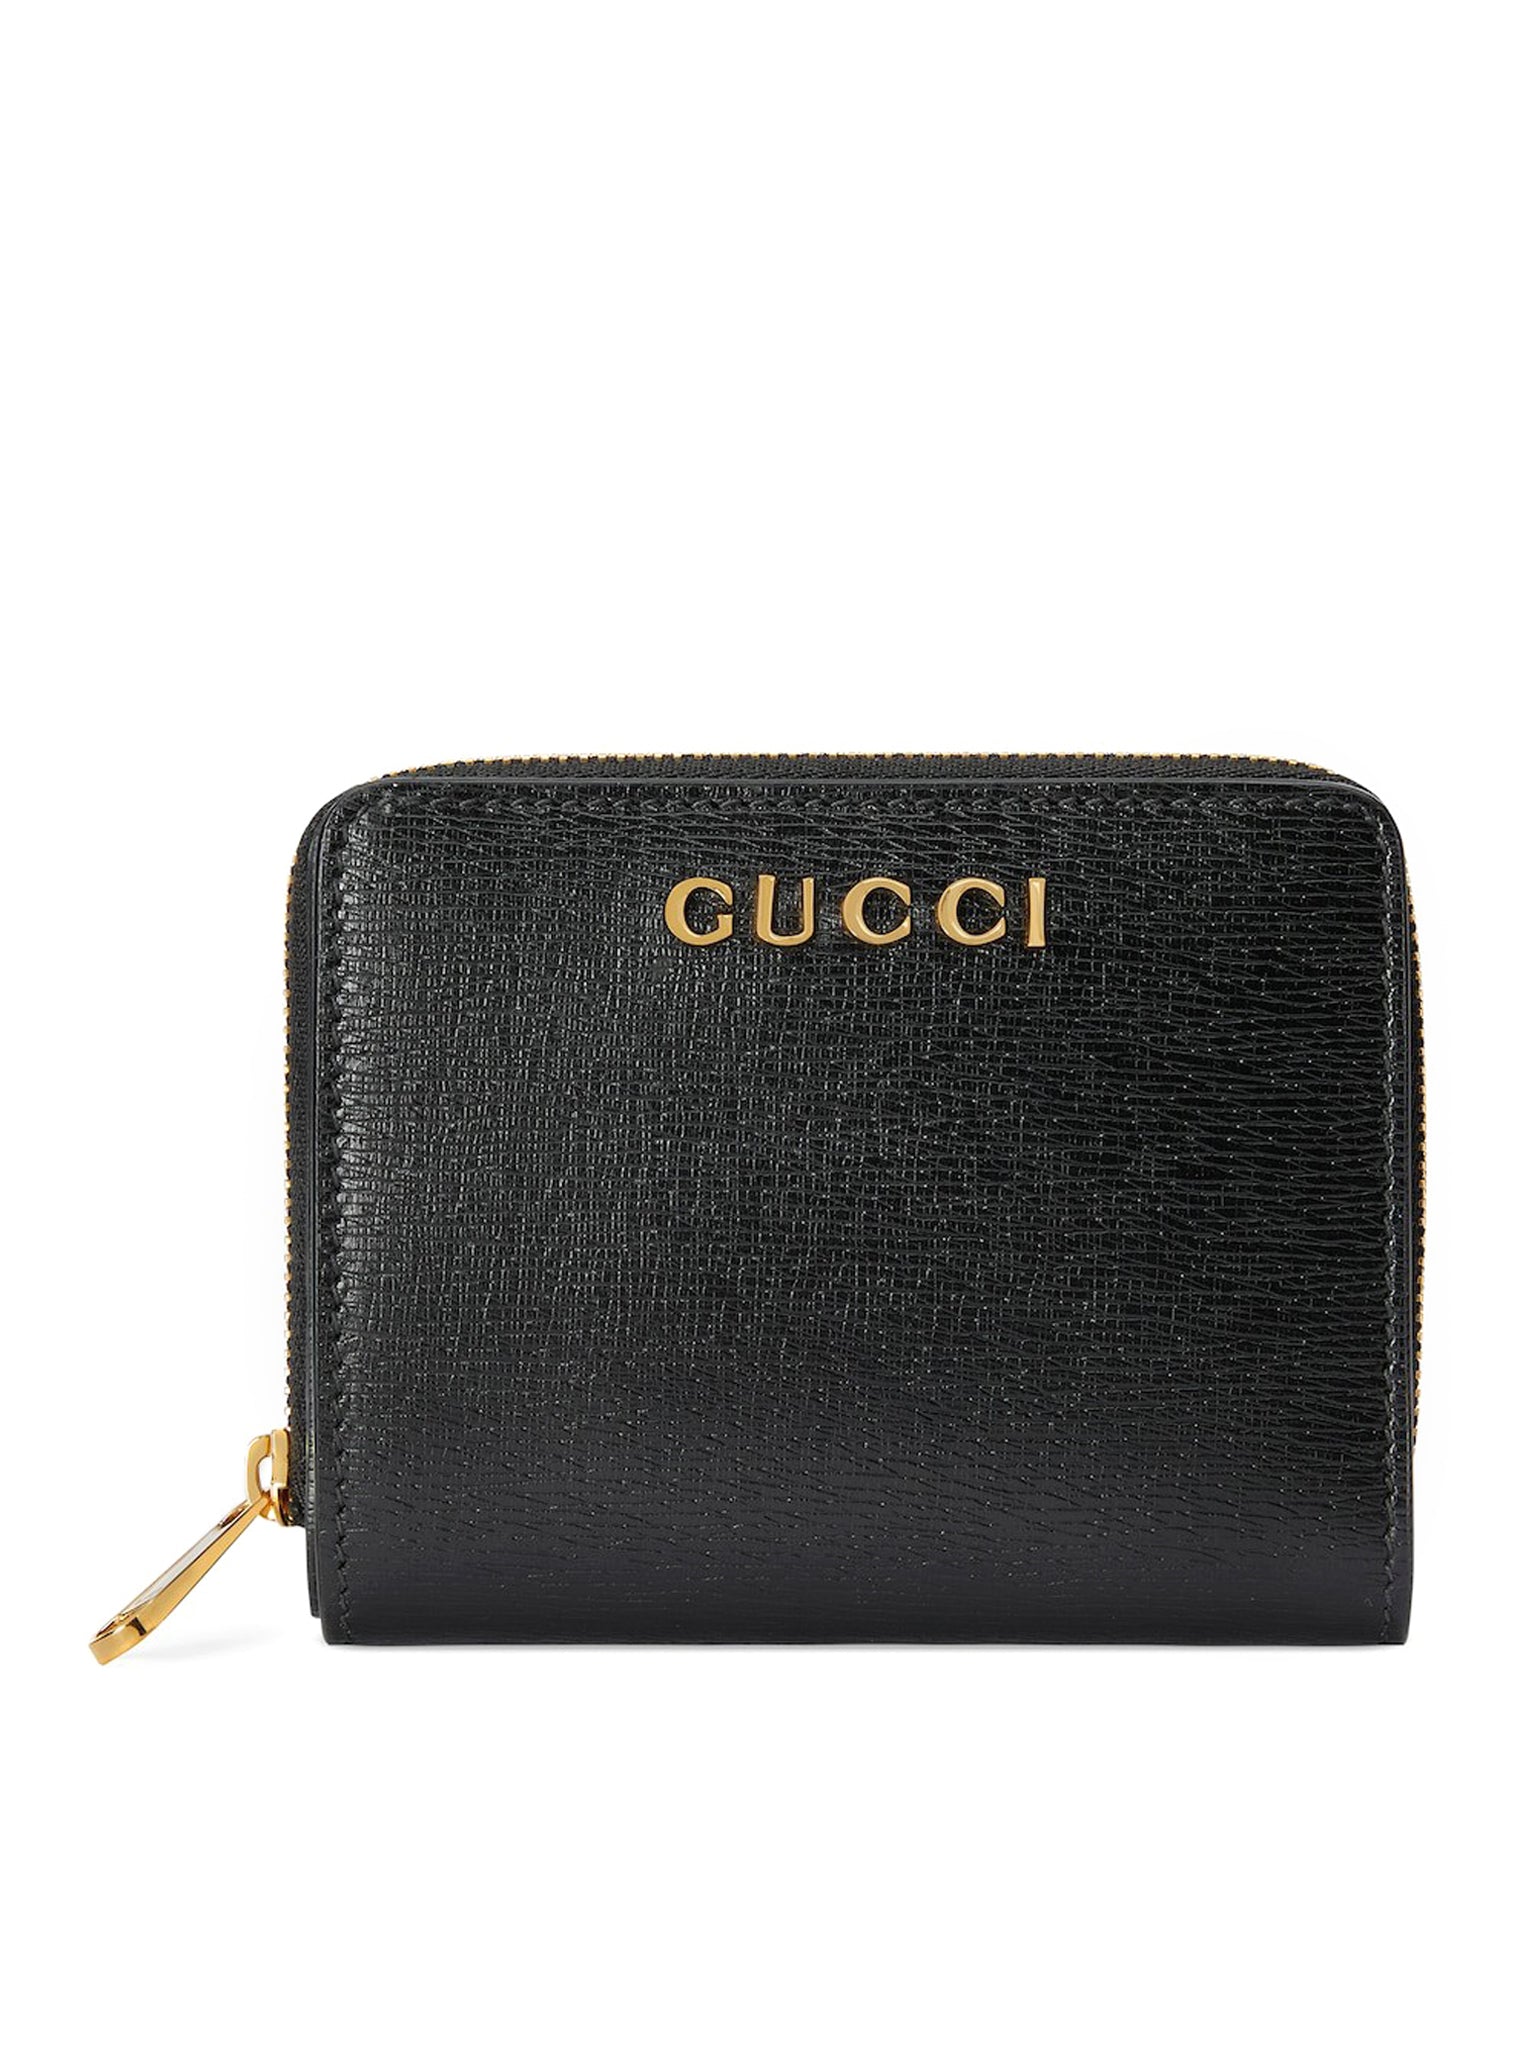 MINI WALLET WITH GUCCI LOGO